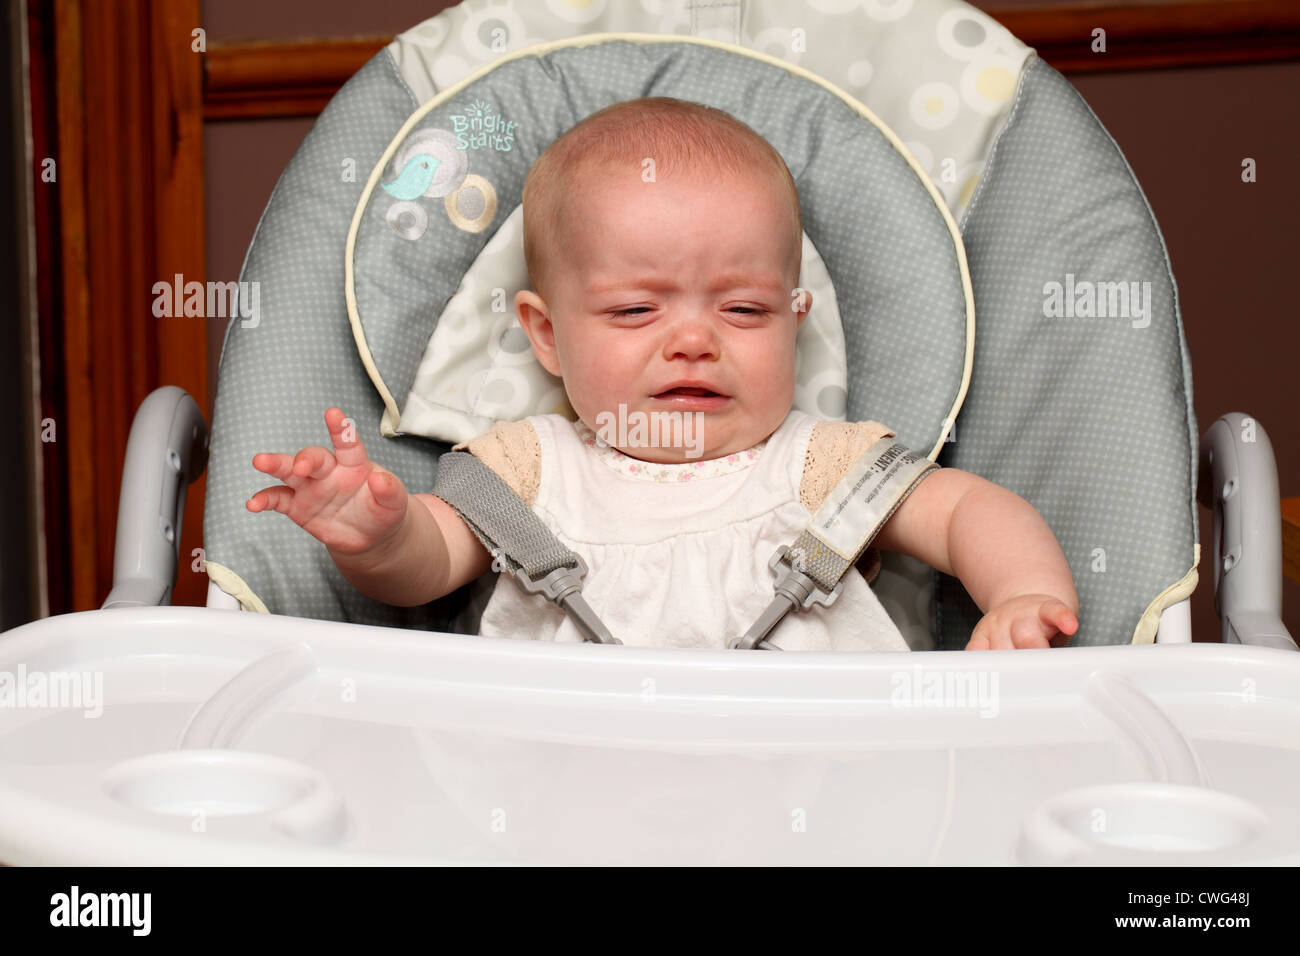 A 6 month old baby girl, sitting in a high chair, cries while waiting to be fed Stock Photo